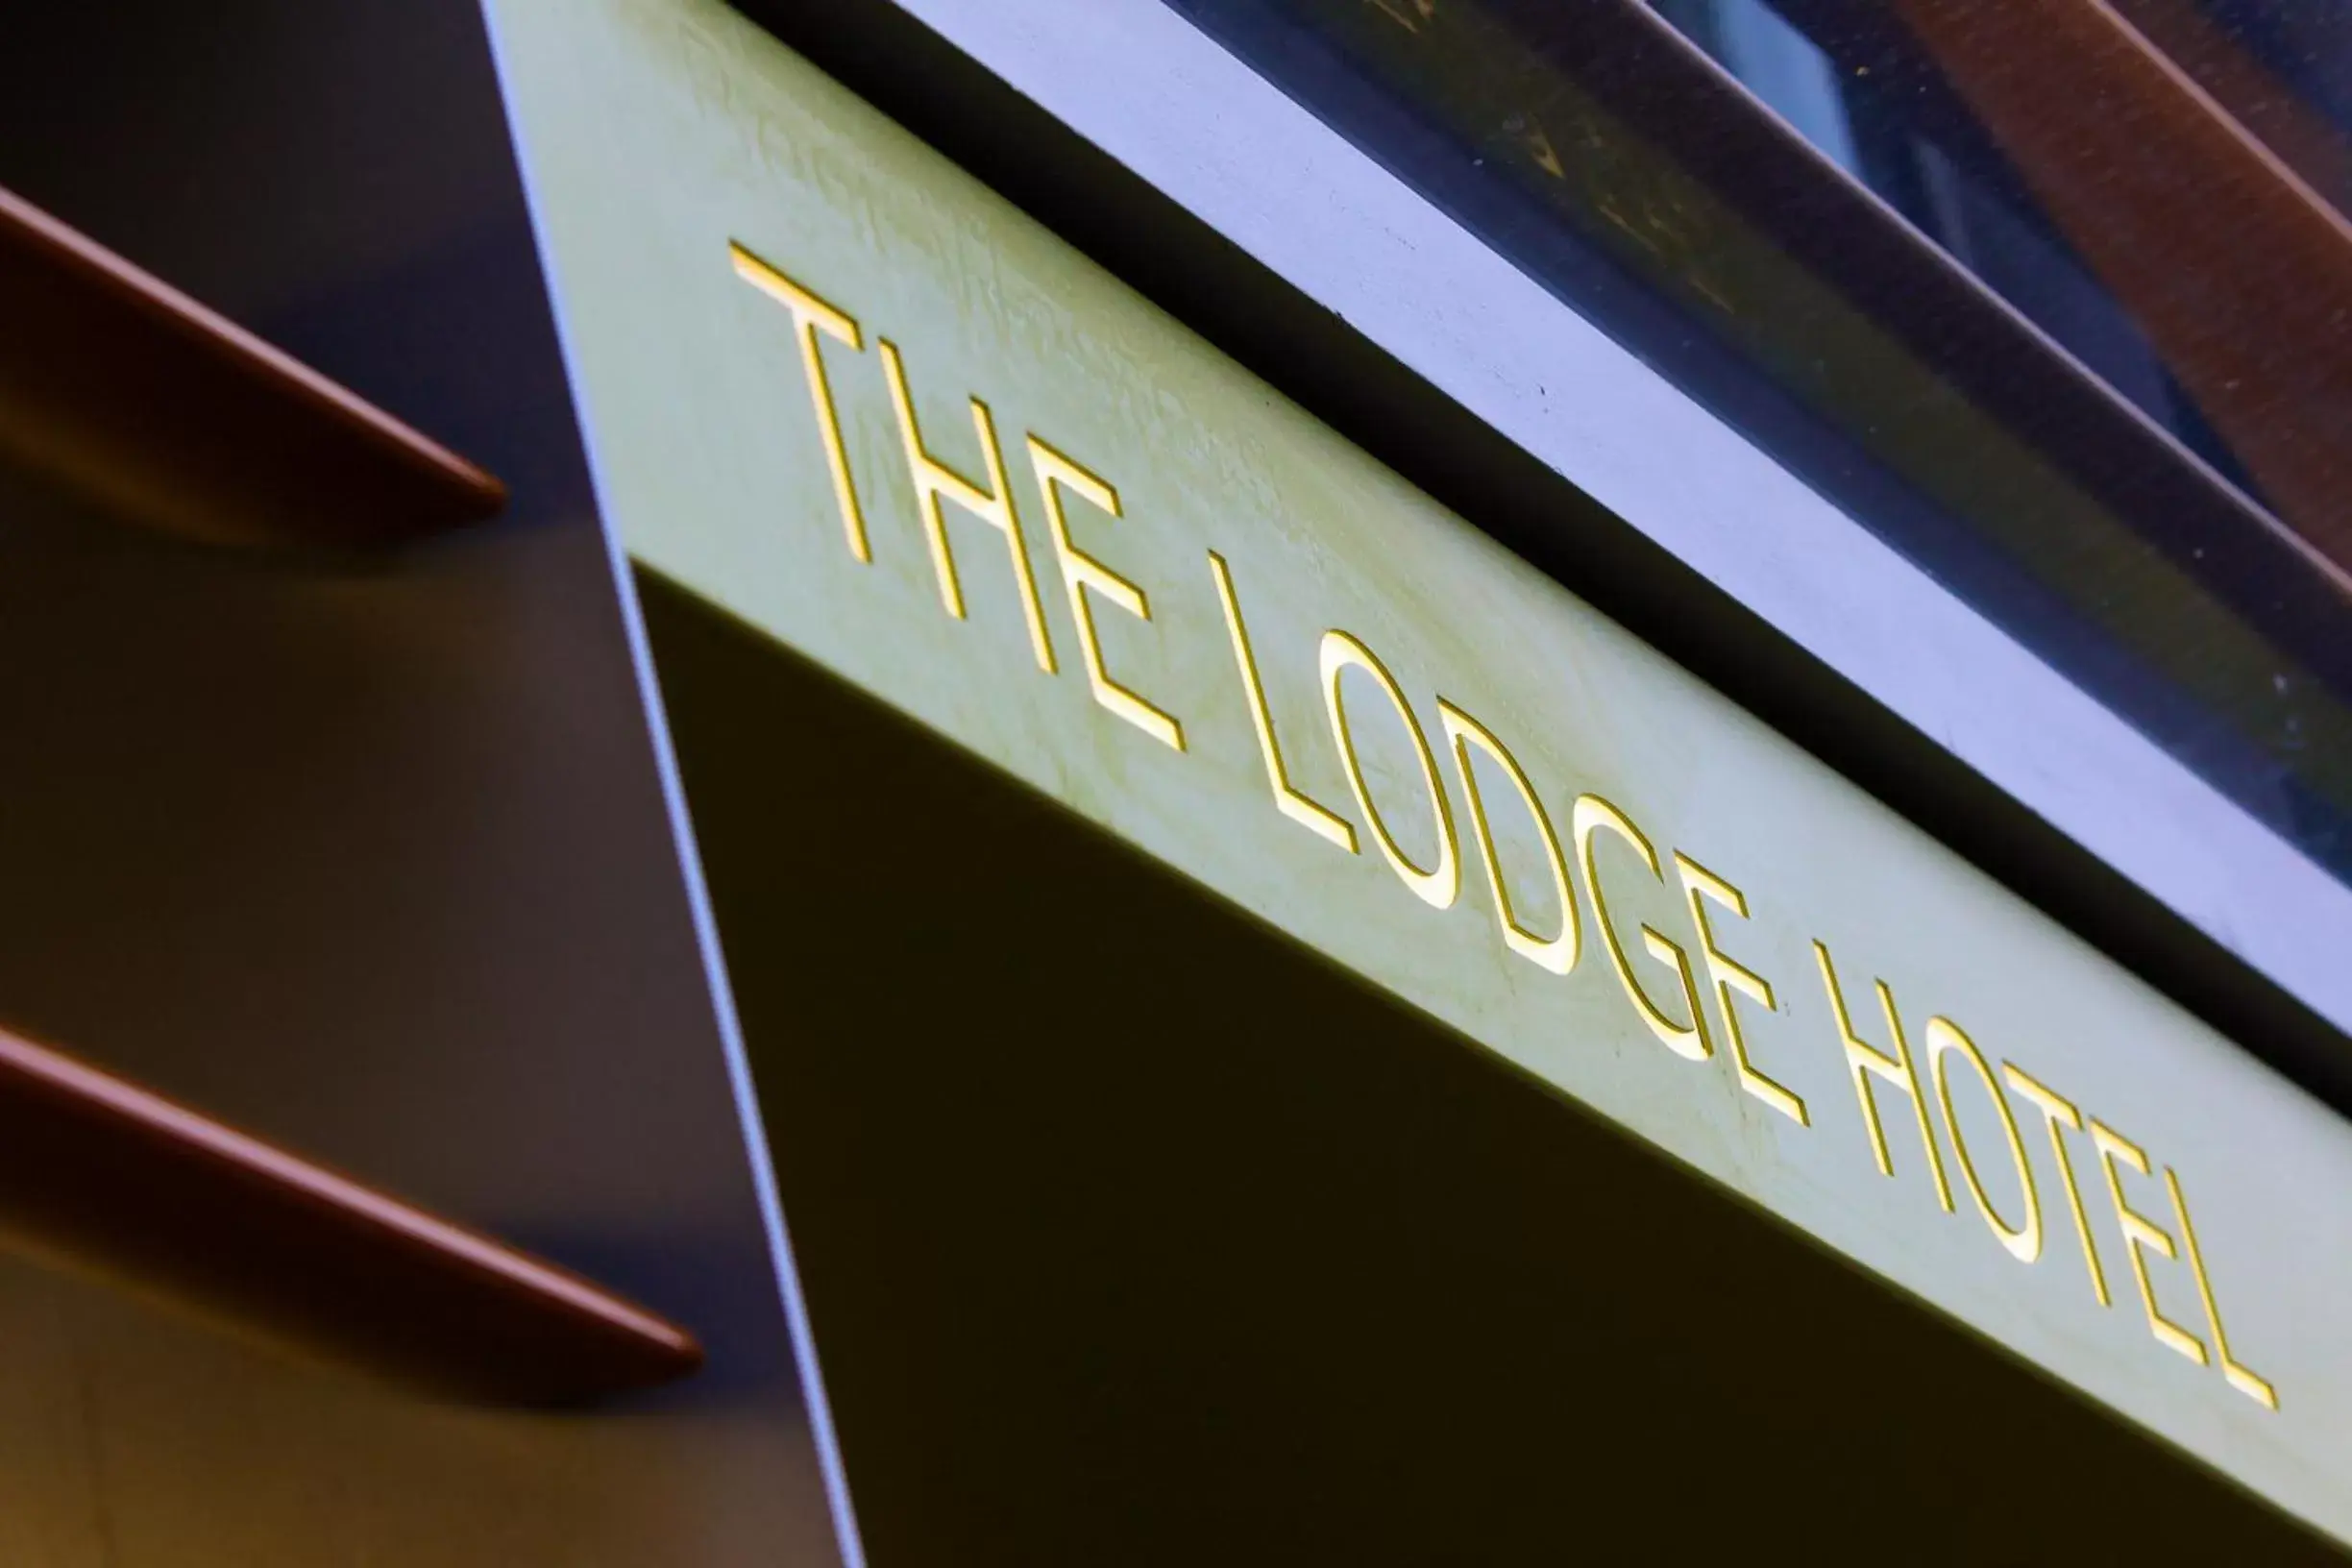 Facade/entrance in The Lodge Hotel - Putney